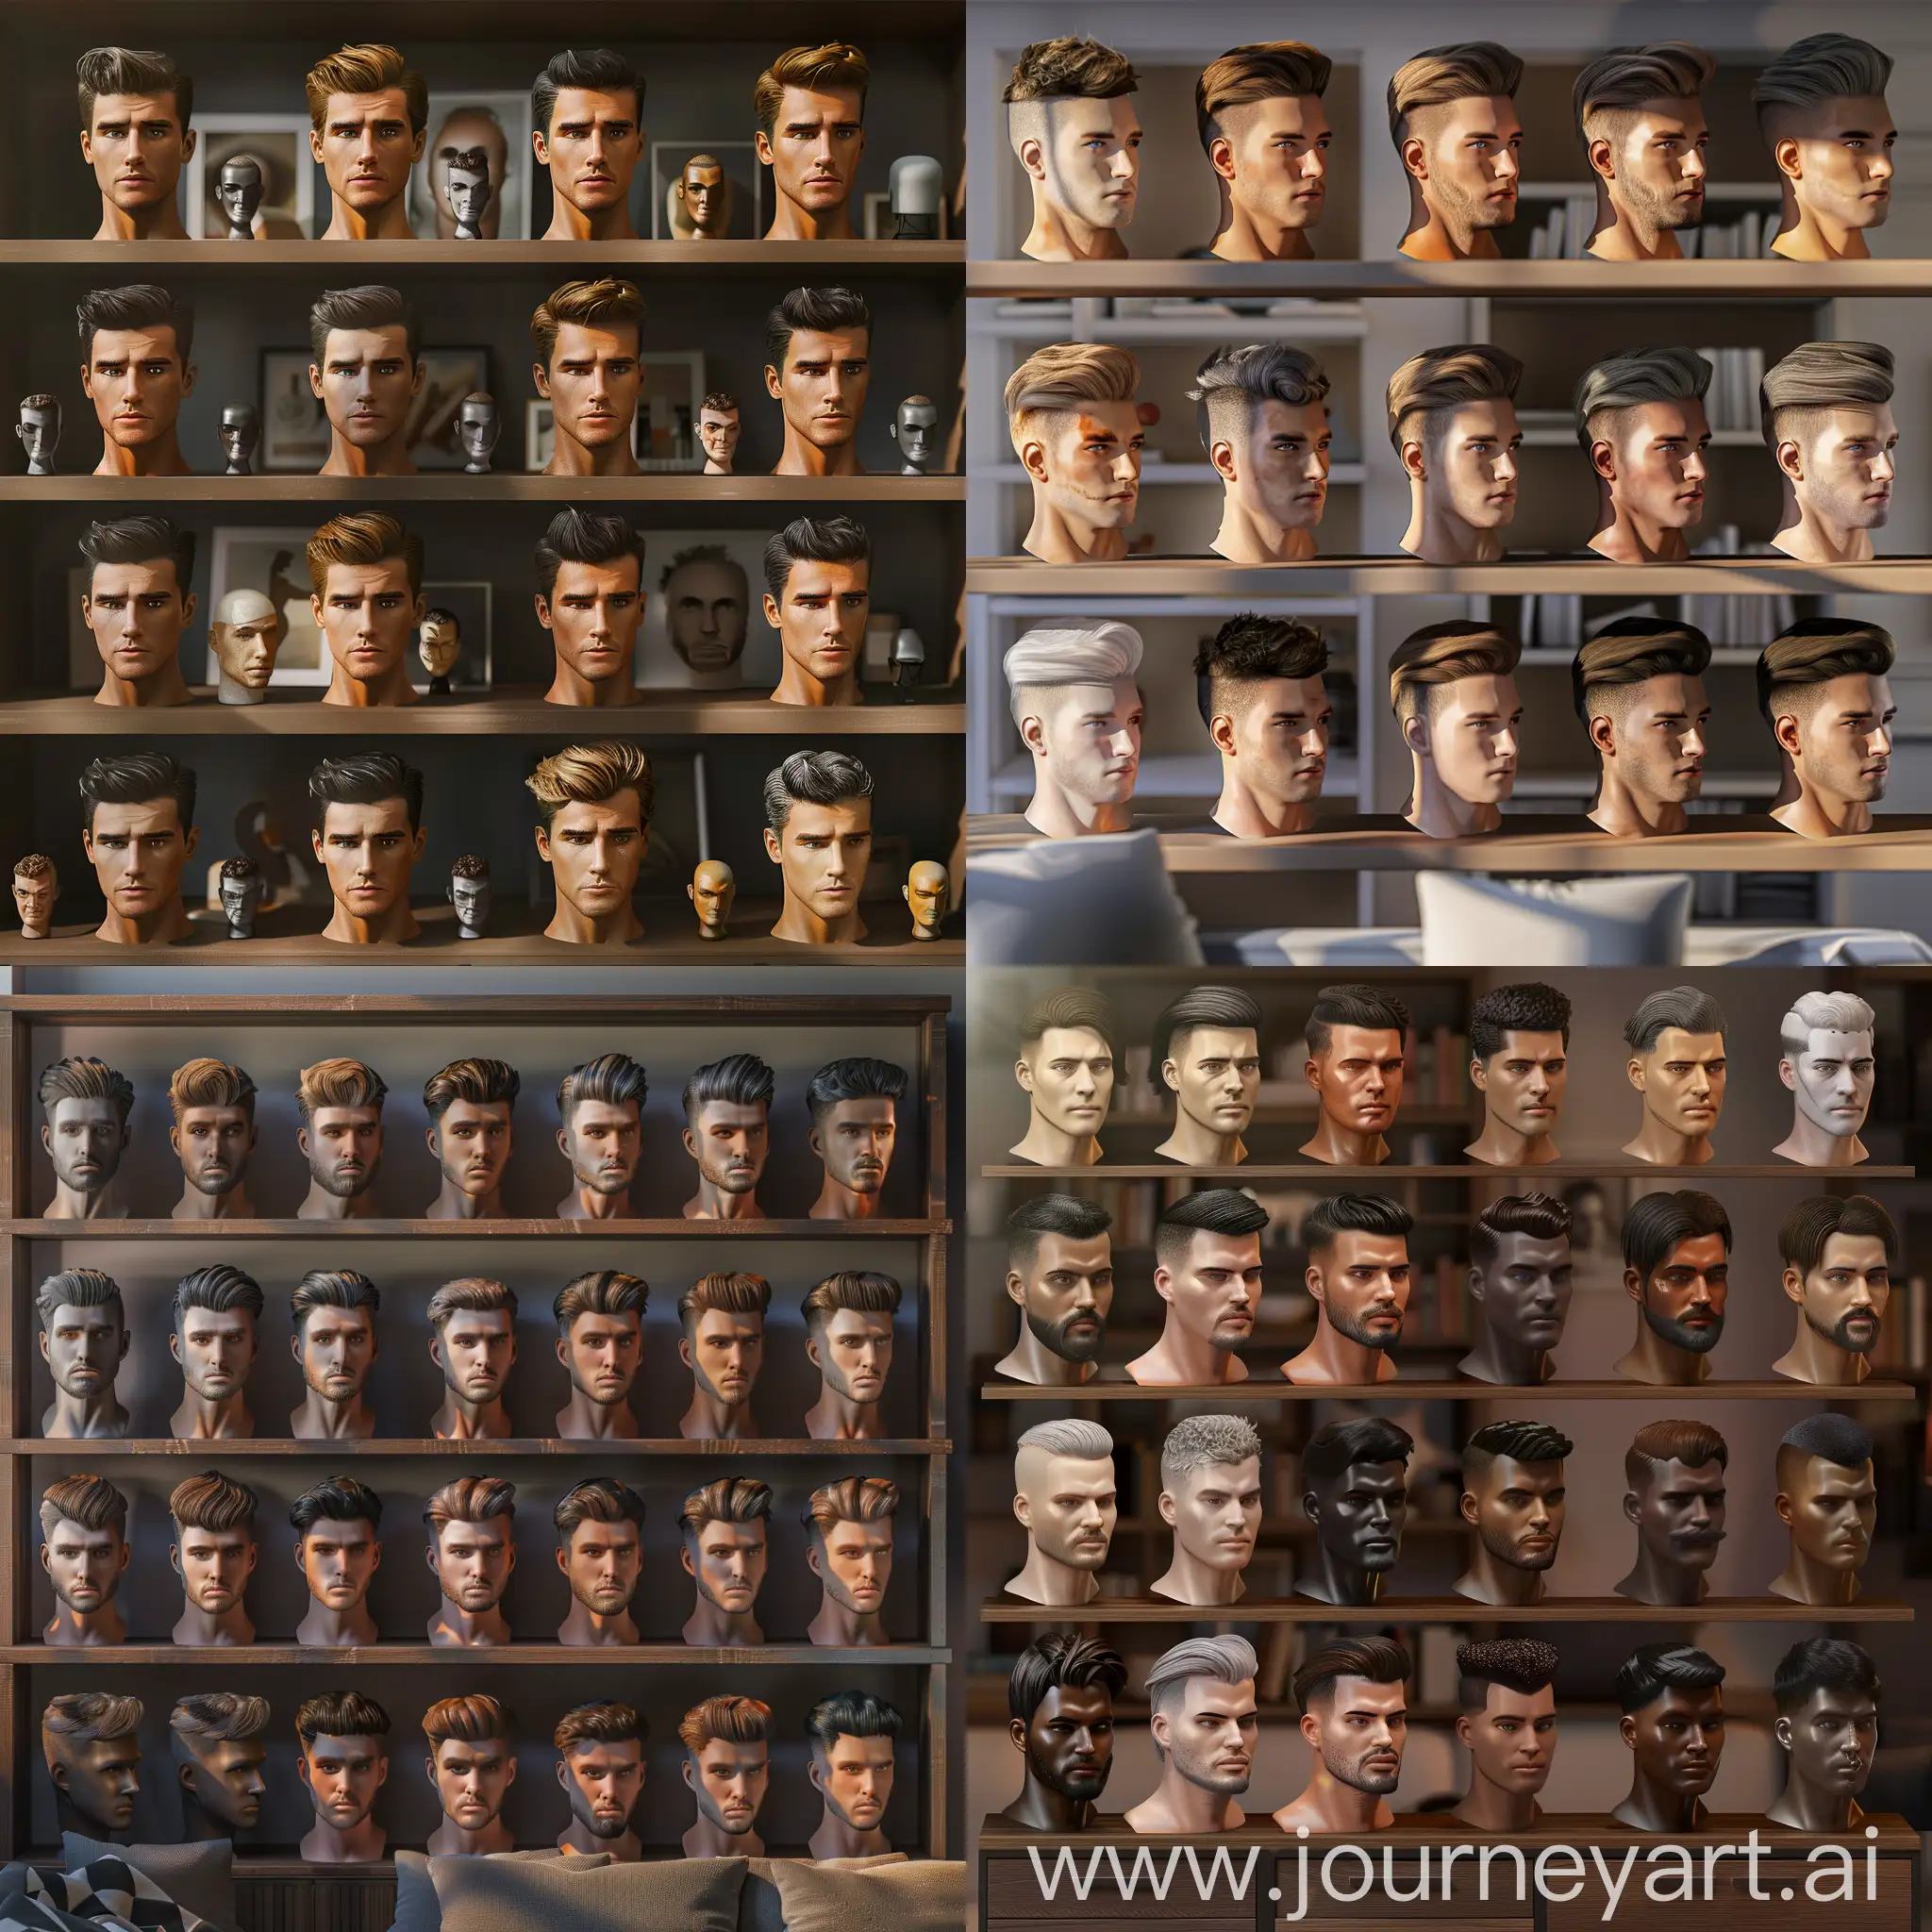 Realistic-Collection-of-Handsome-Male-Heads-Displayed-in-Daylight-Living-Room